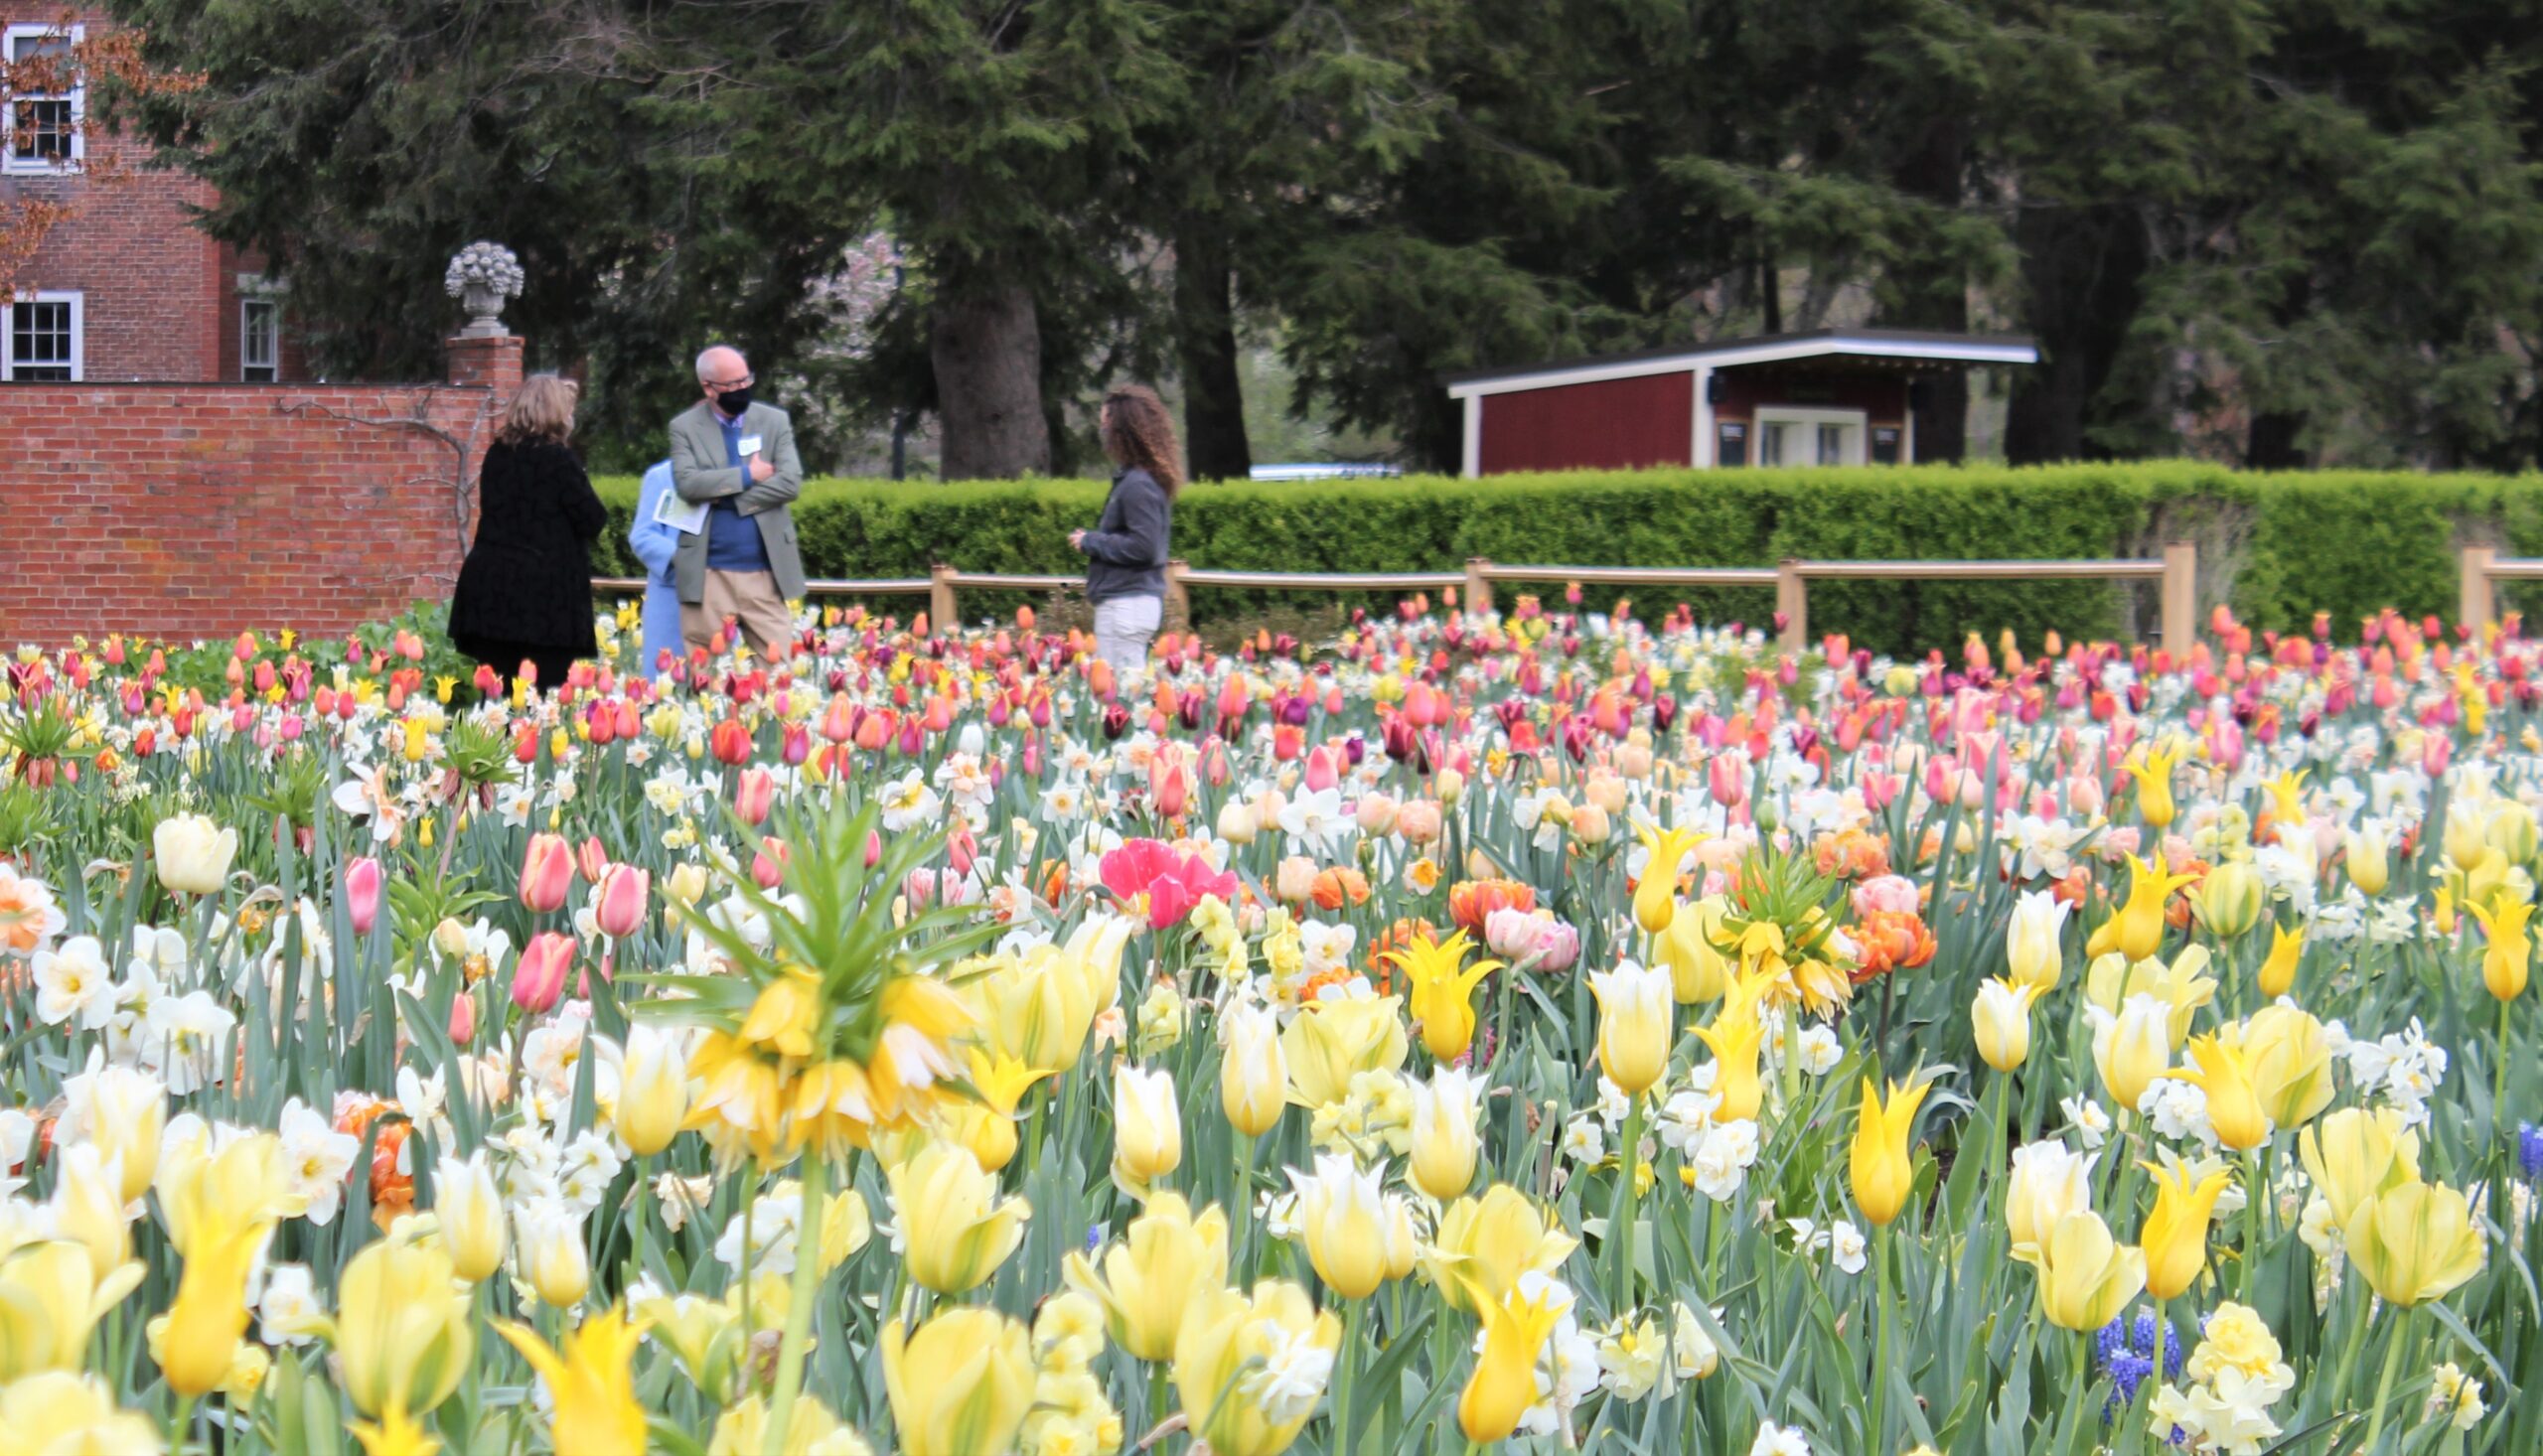 A field of yellow, white, and pink tulips with visitors walking and brick buildings in the background at a Trustees property